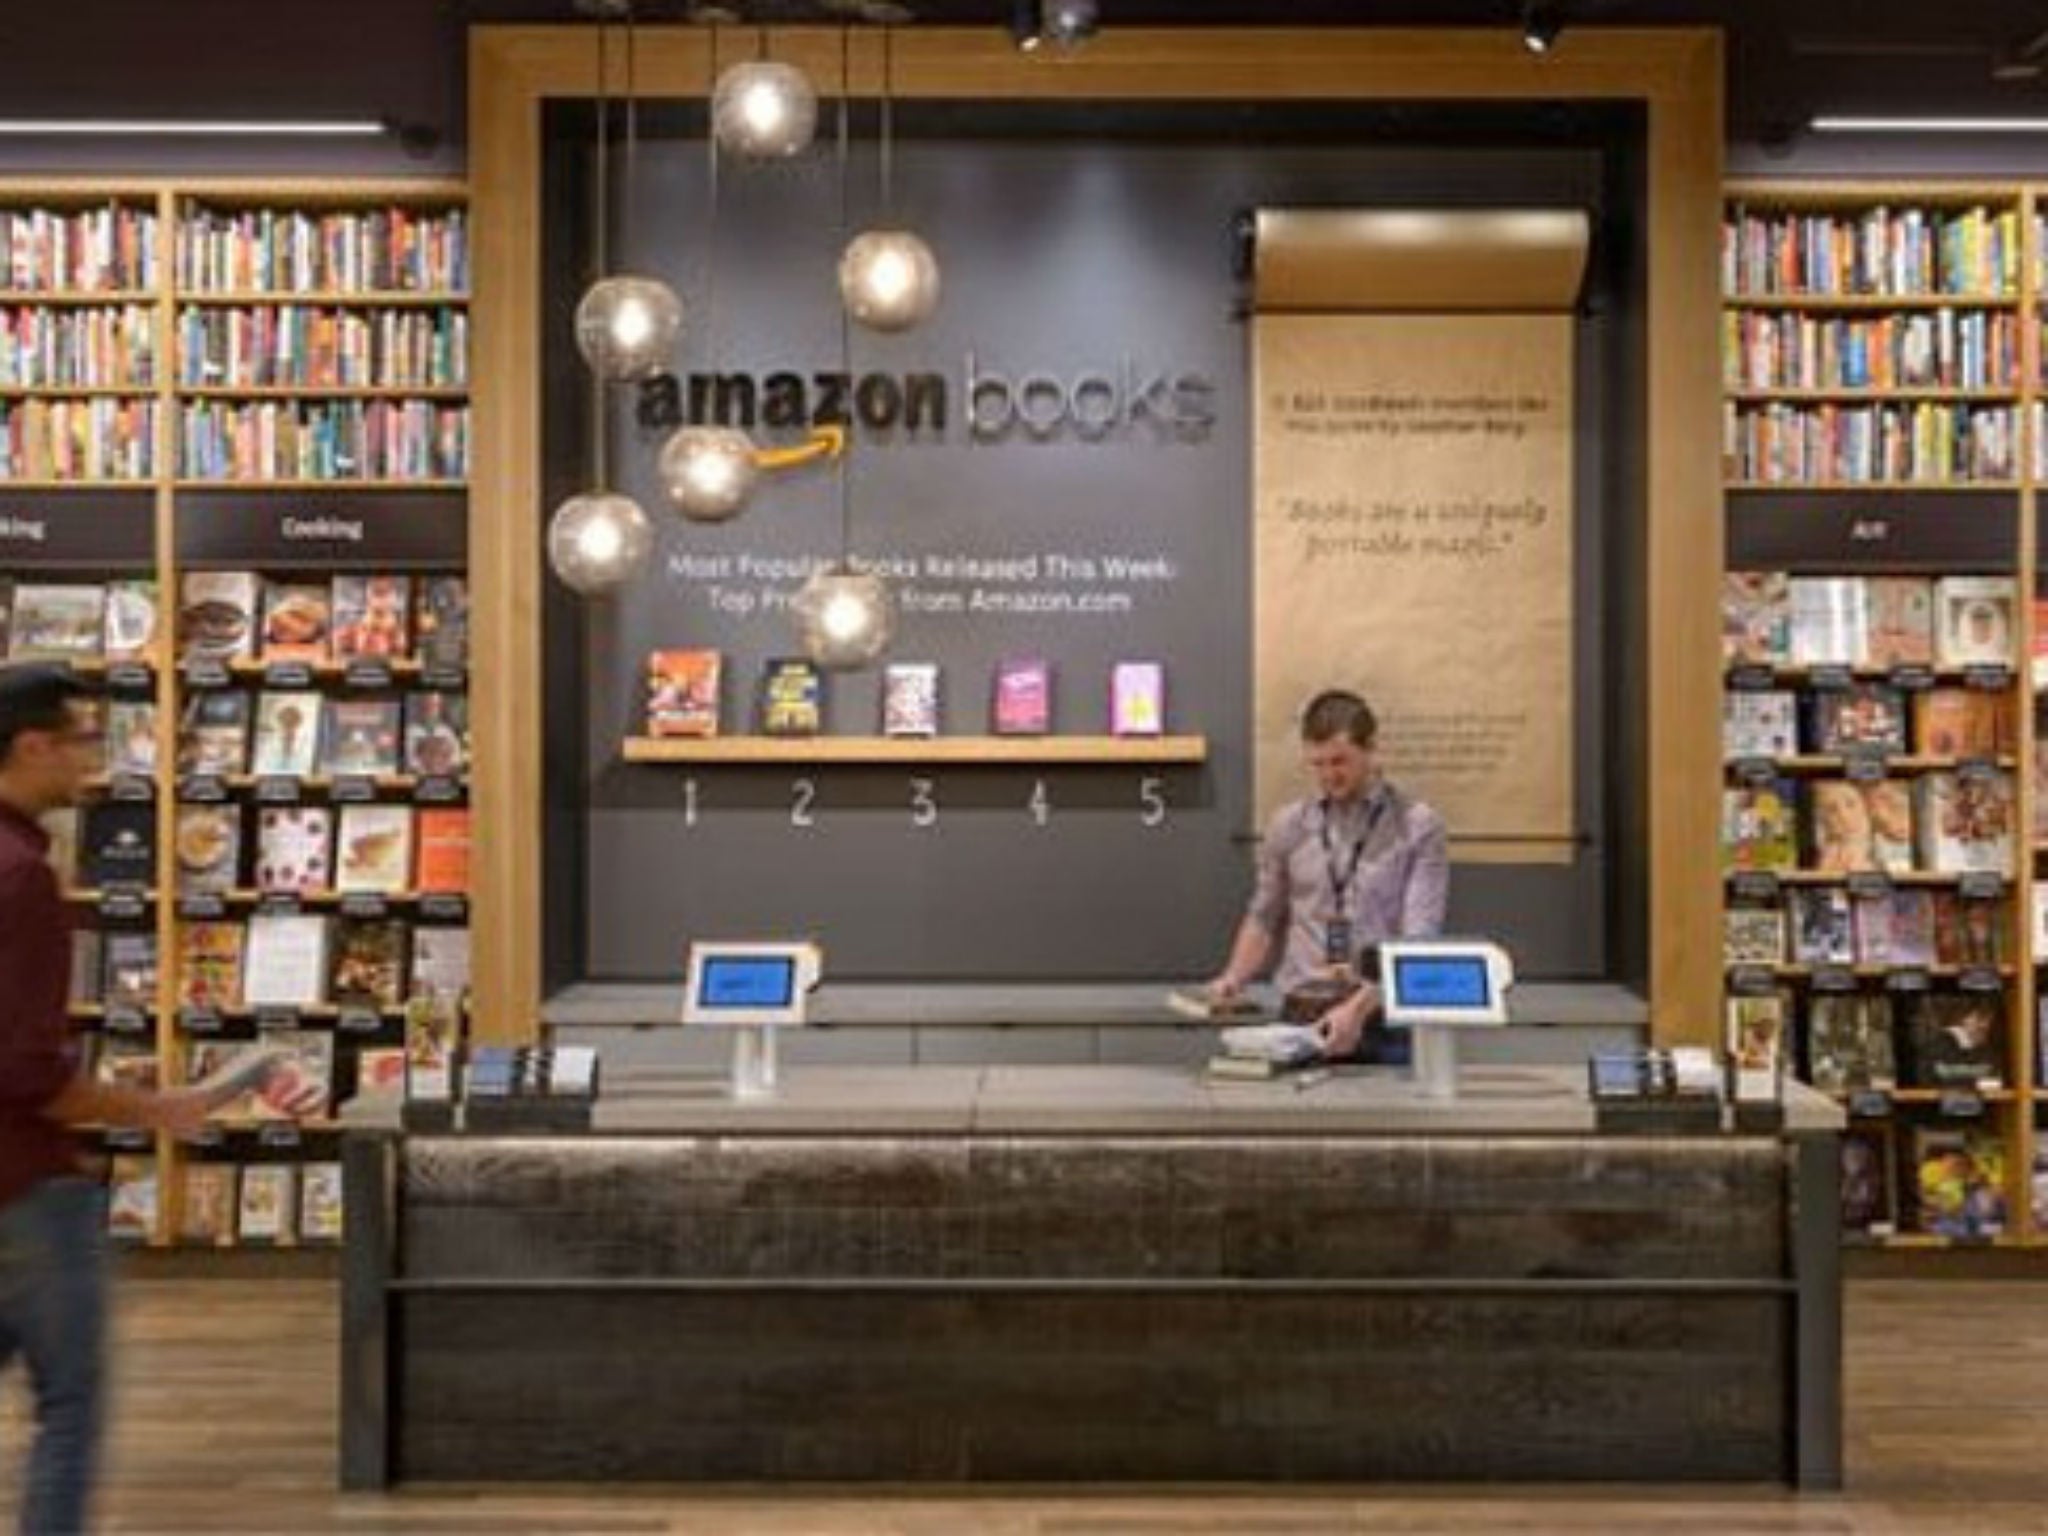 Who said Amazon wanted to see the end of physical bookshops?